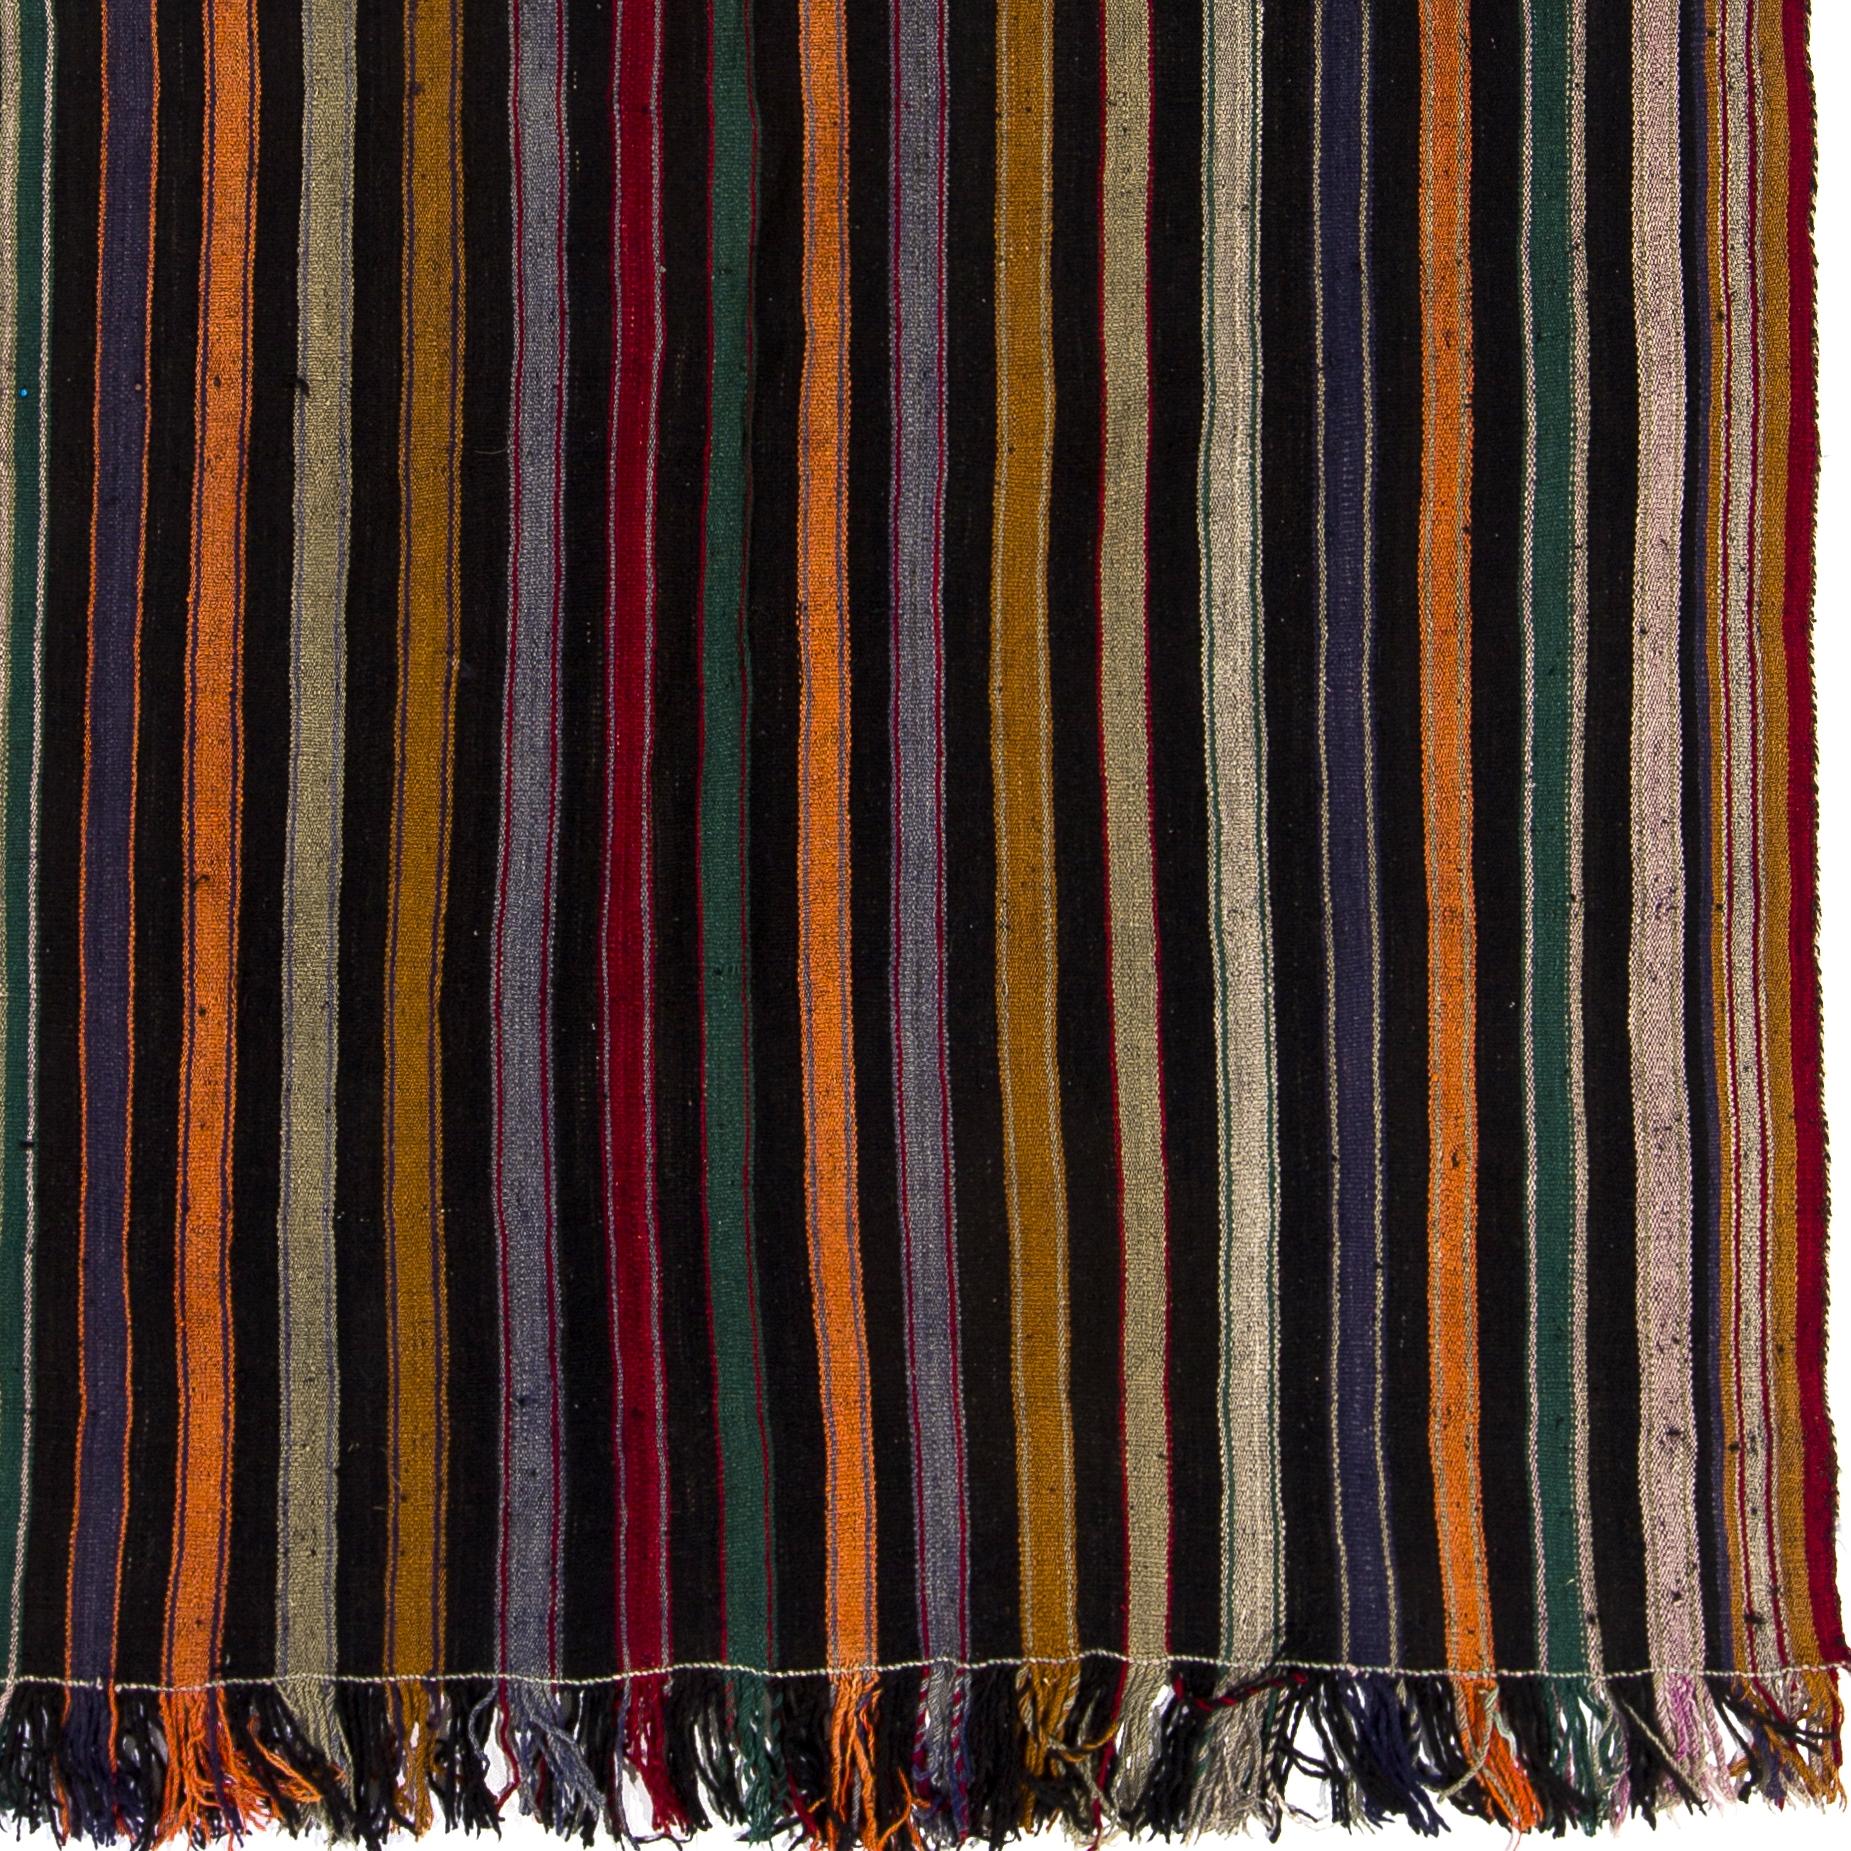 5.6x7 Ft Hand-Woven Vintage Kilim Rug with Stripes. 100% Wool Floor Covering In Excellent Condition For Sale In Philadelphia, PA